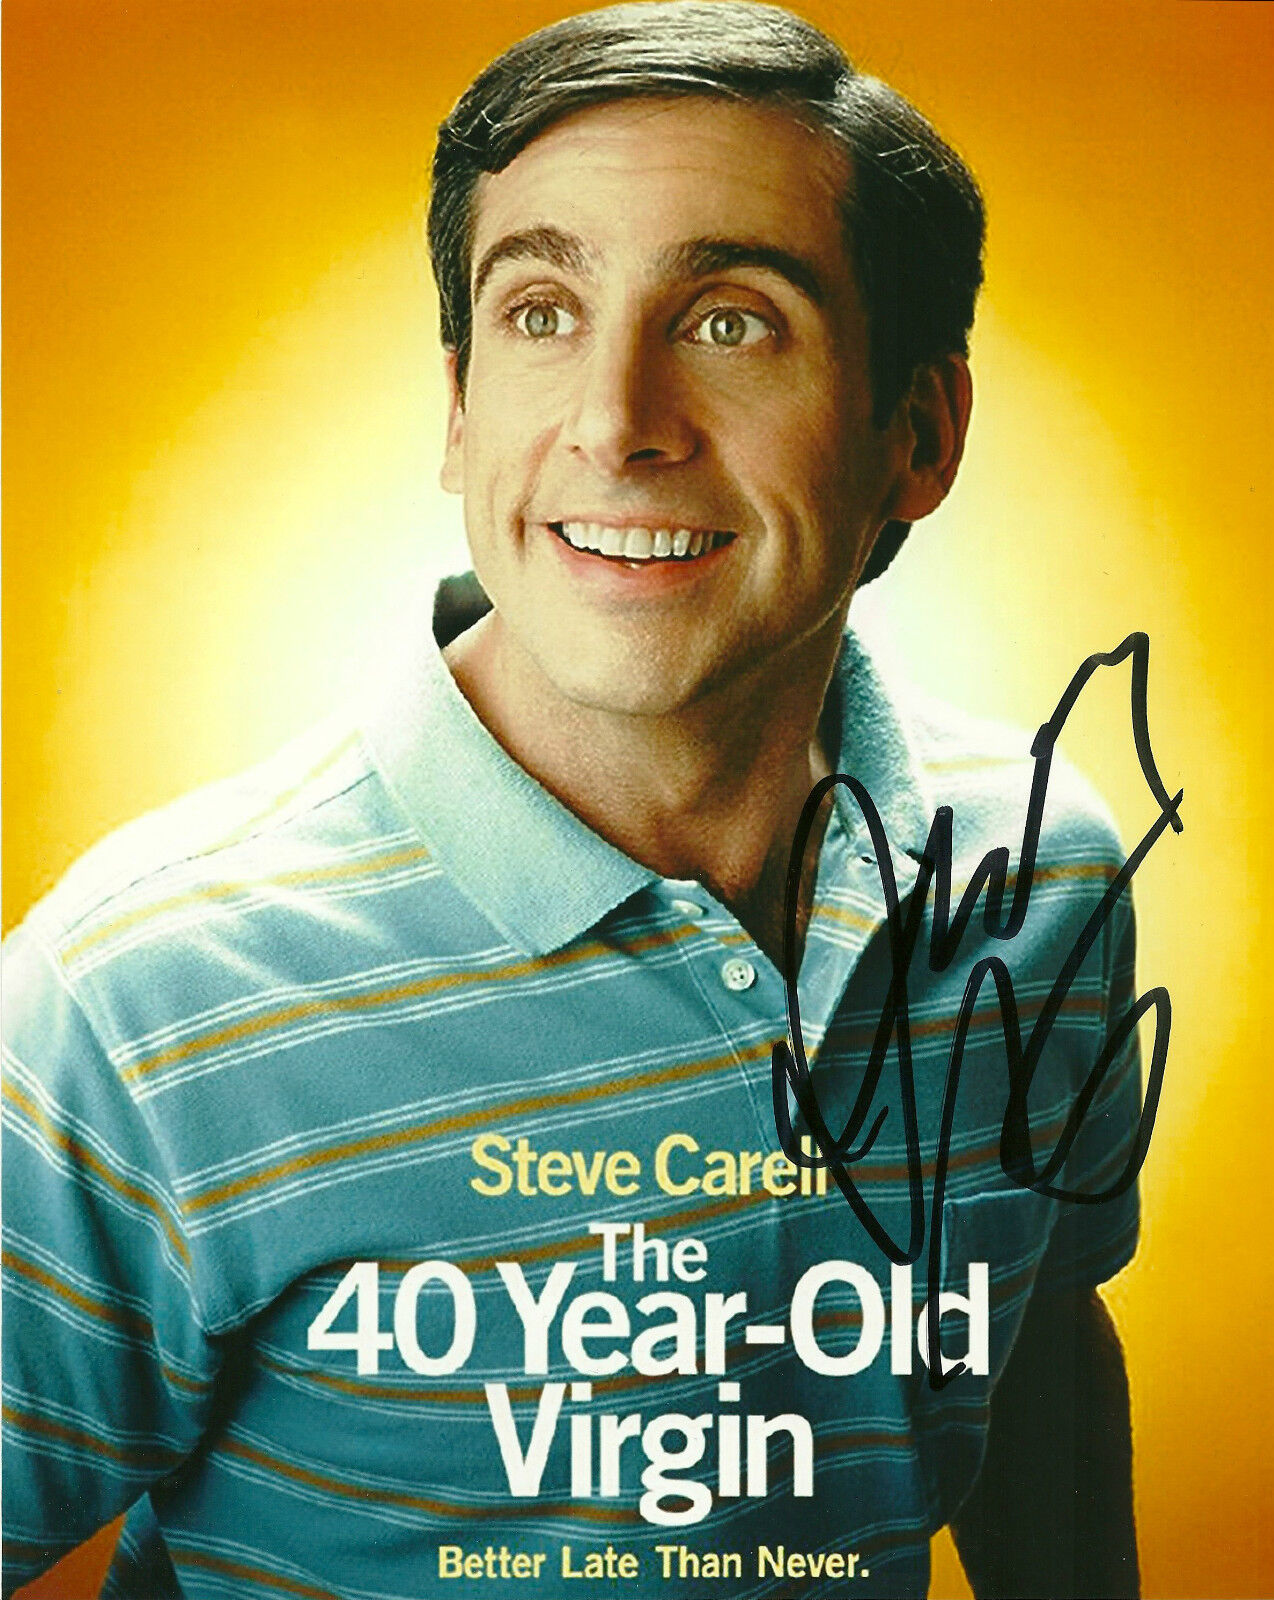 40 Year Old Virgin Judd Apatow Autographed Signed 8x10 Photo Poster painting COA